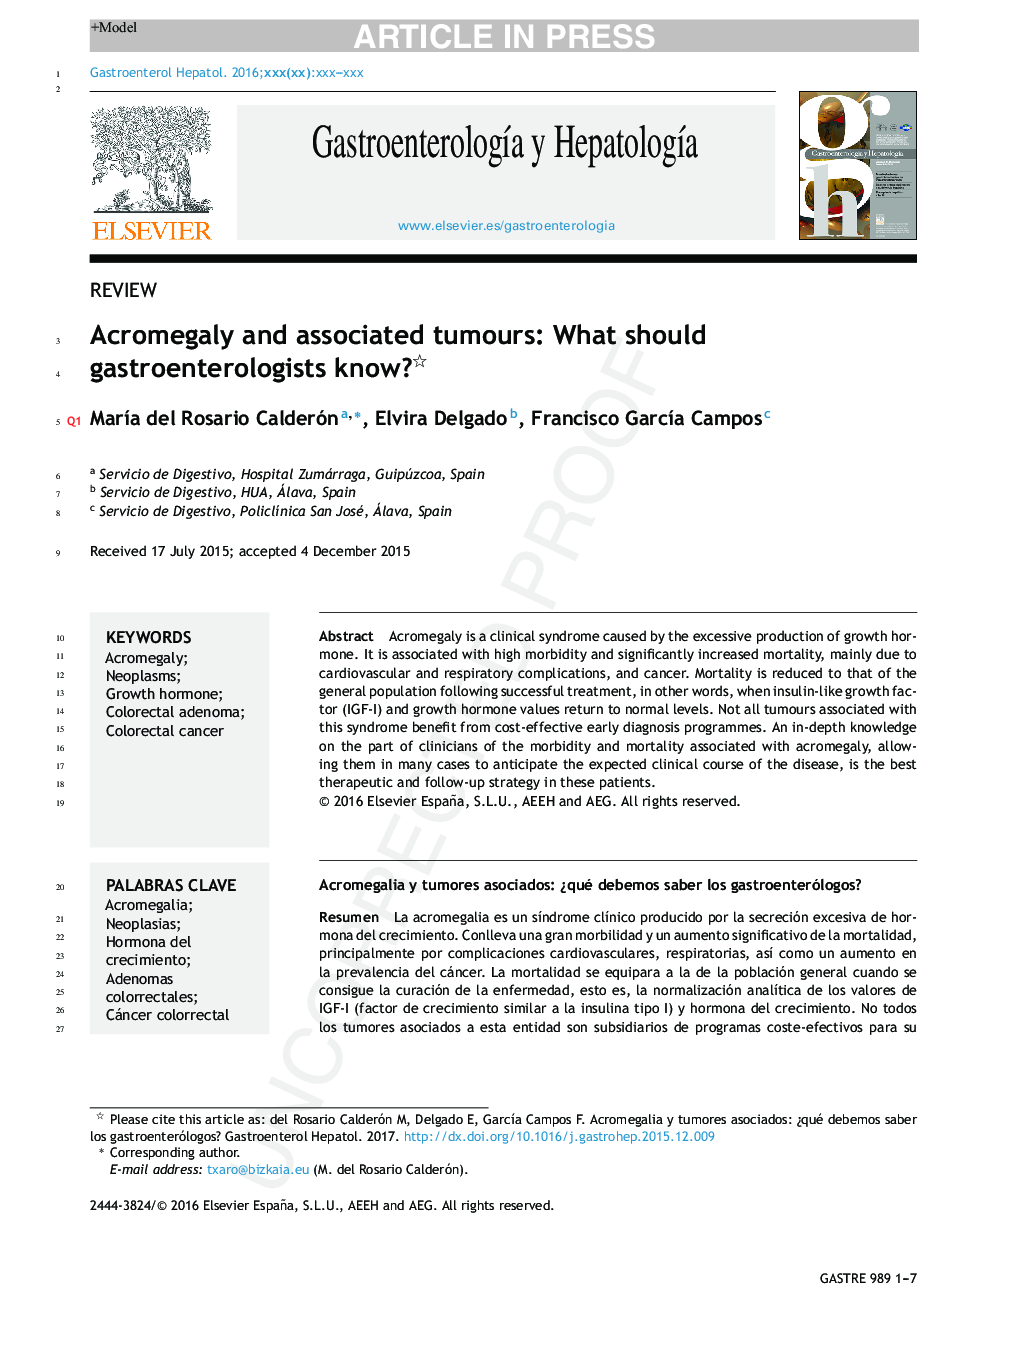 Acromegaly and associated tumours: what should gastroenterologists know?